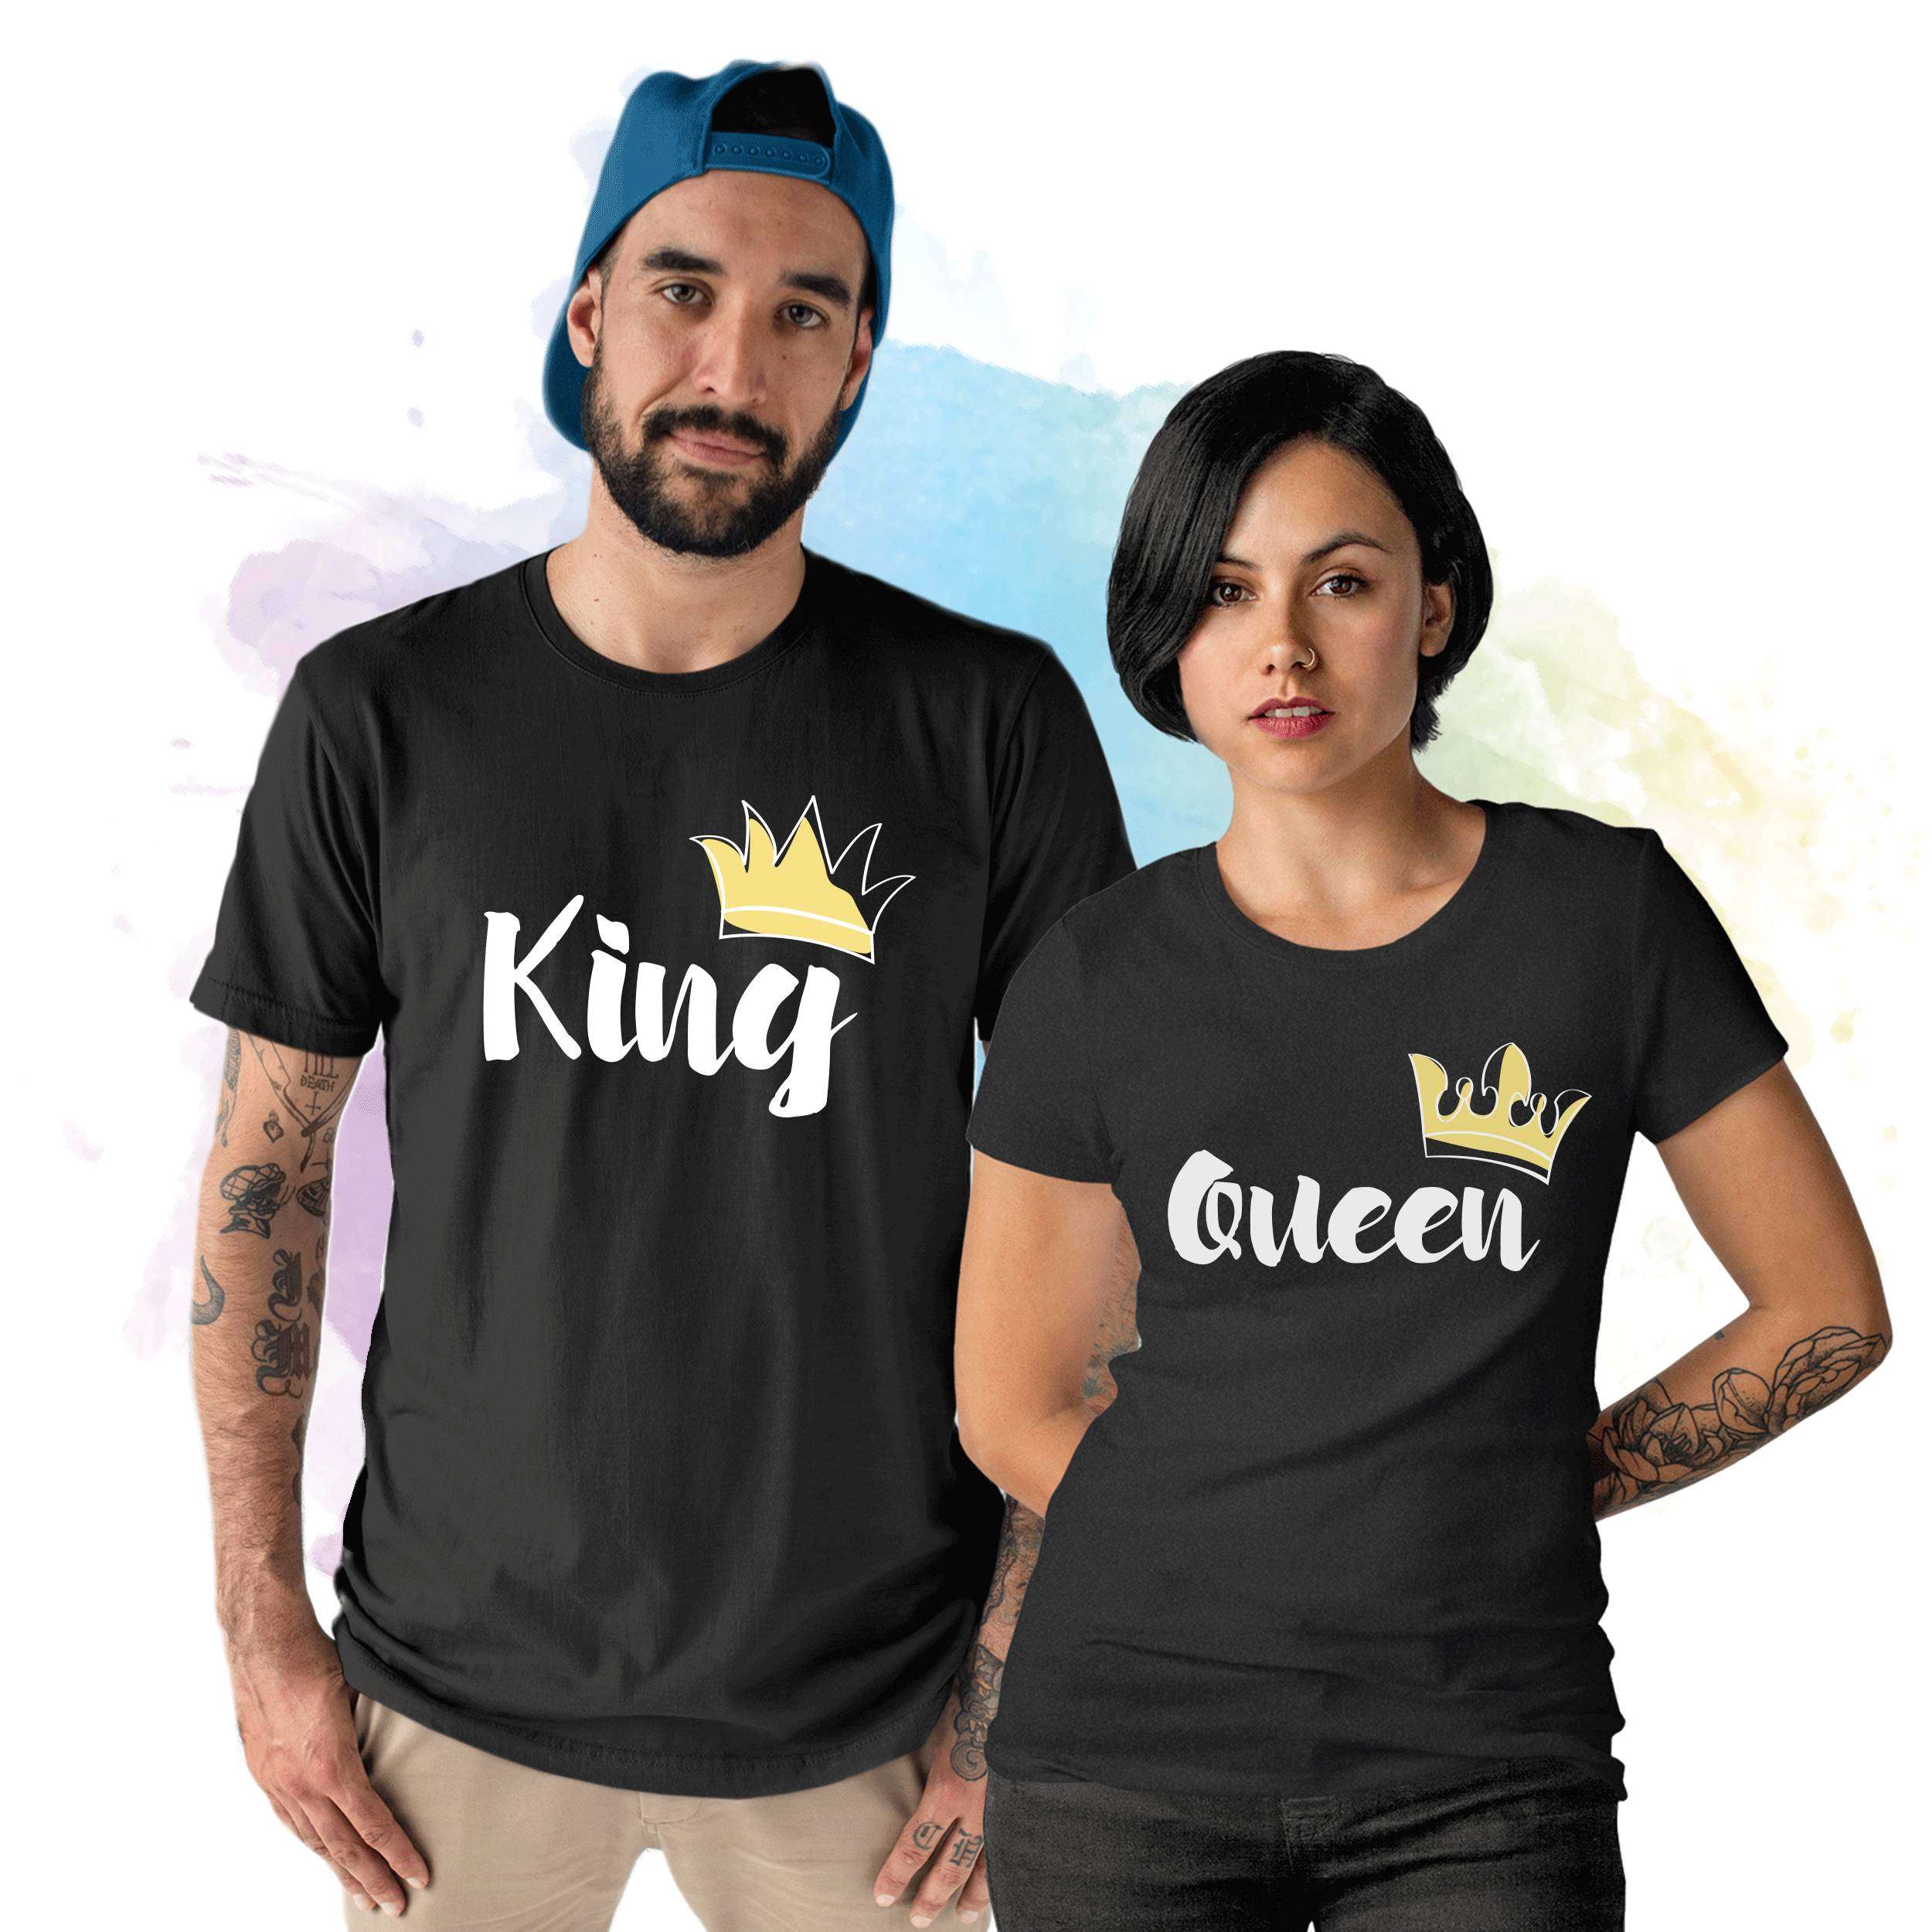 His and Hers Crown Matching Shirts for Couples